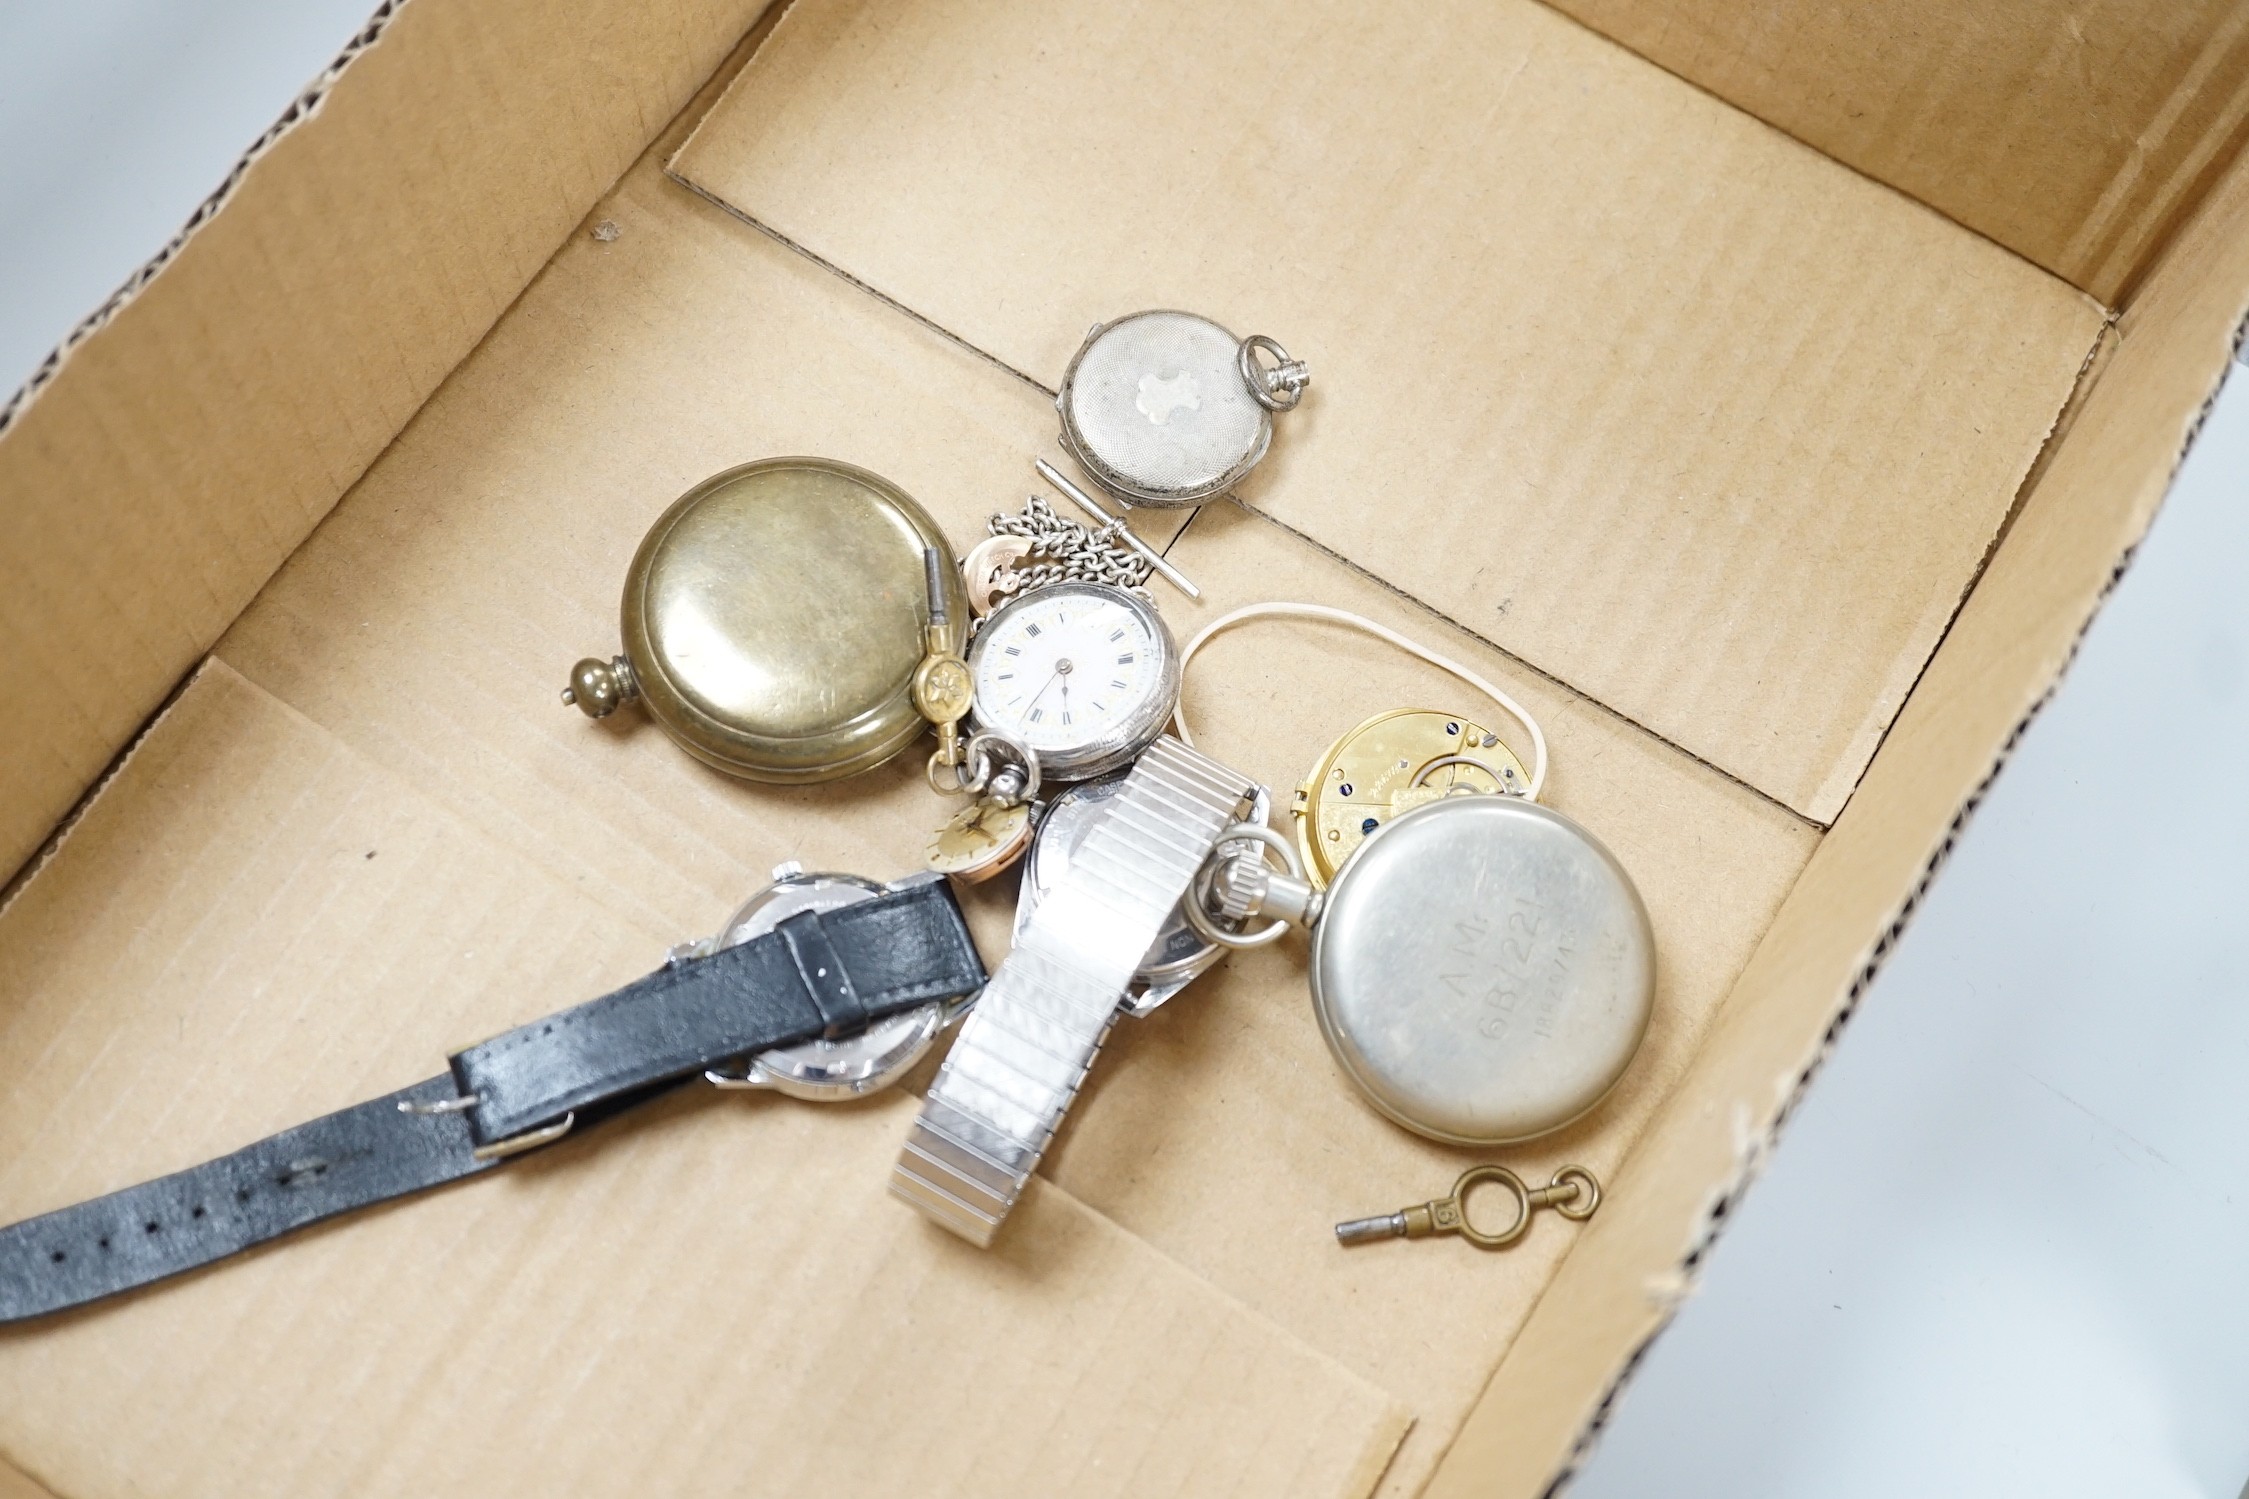 A group of wrist and pocket watches, stop watch, carriage clock, etc. - Image 2 of 6